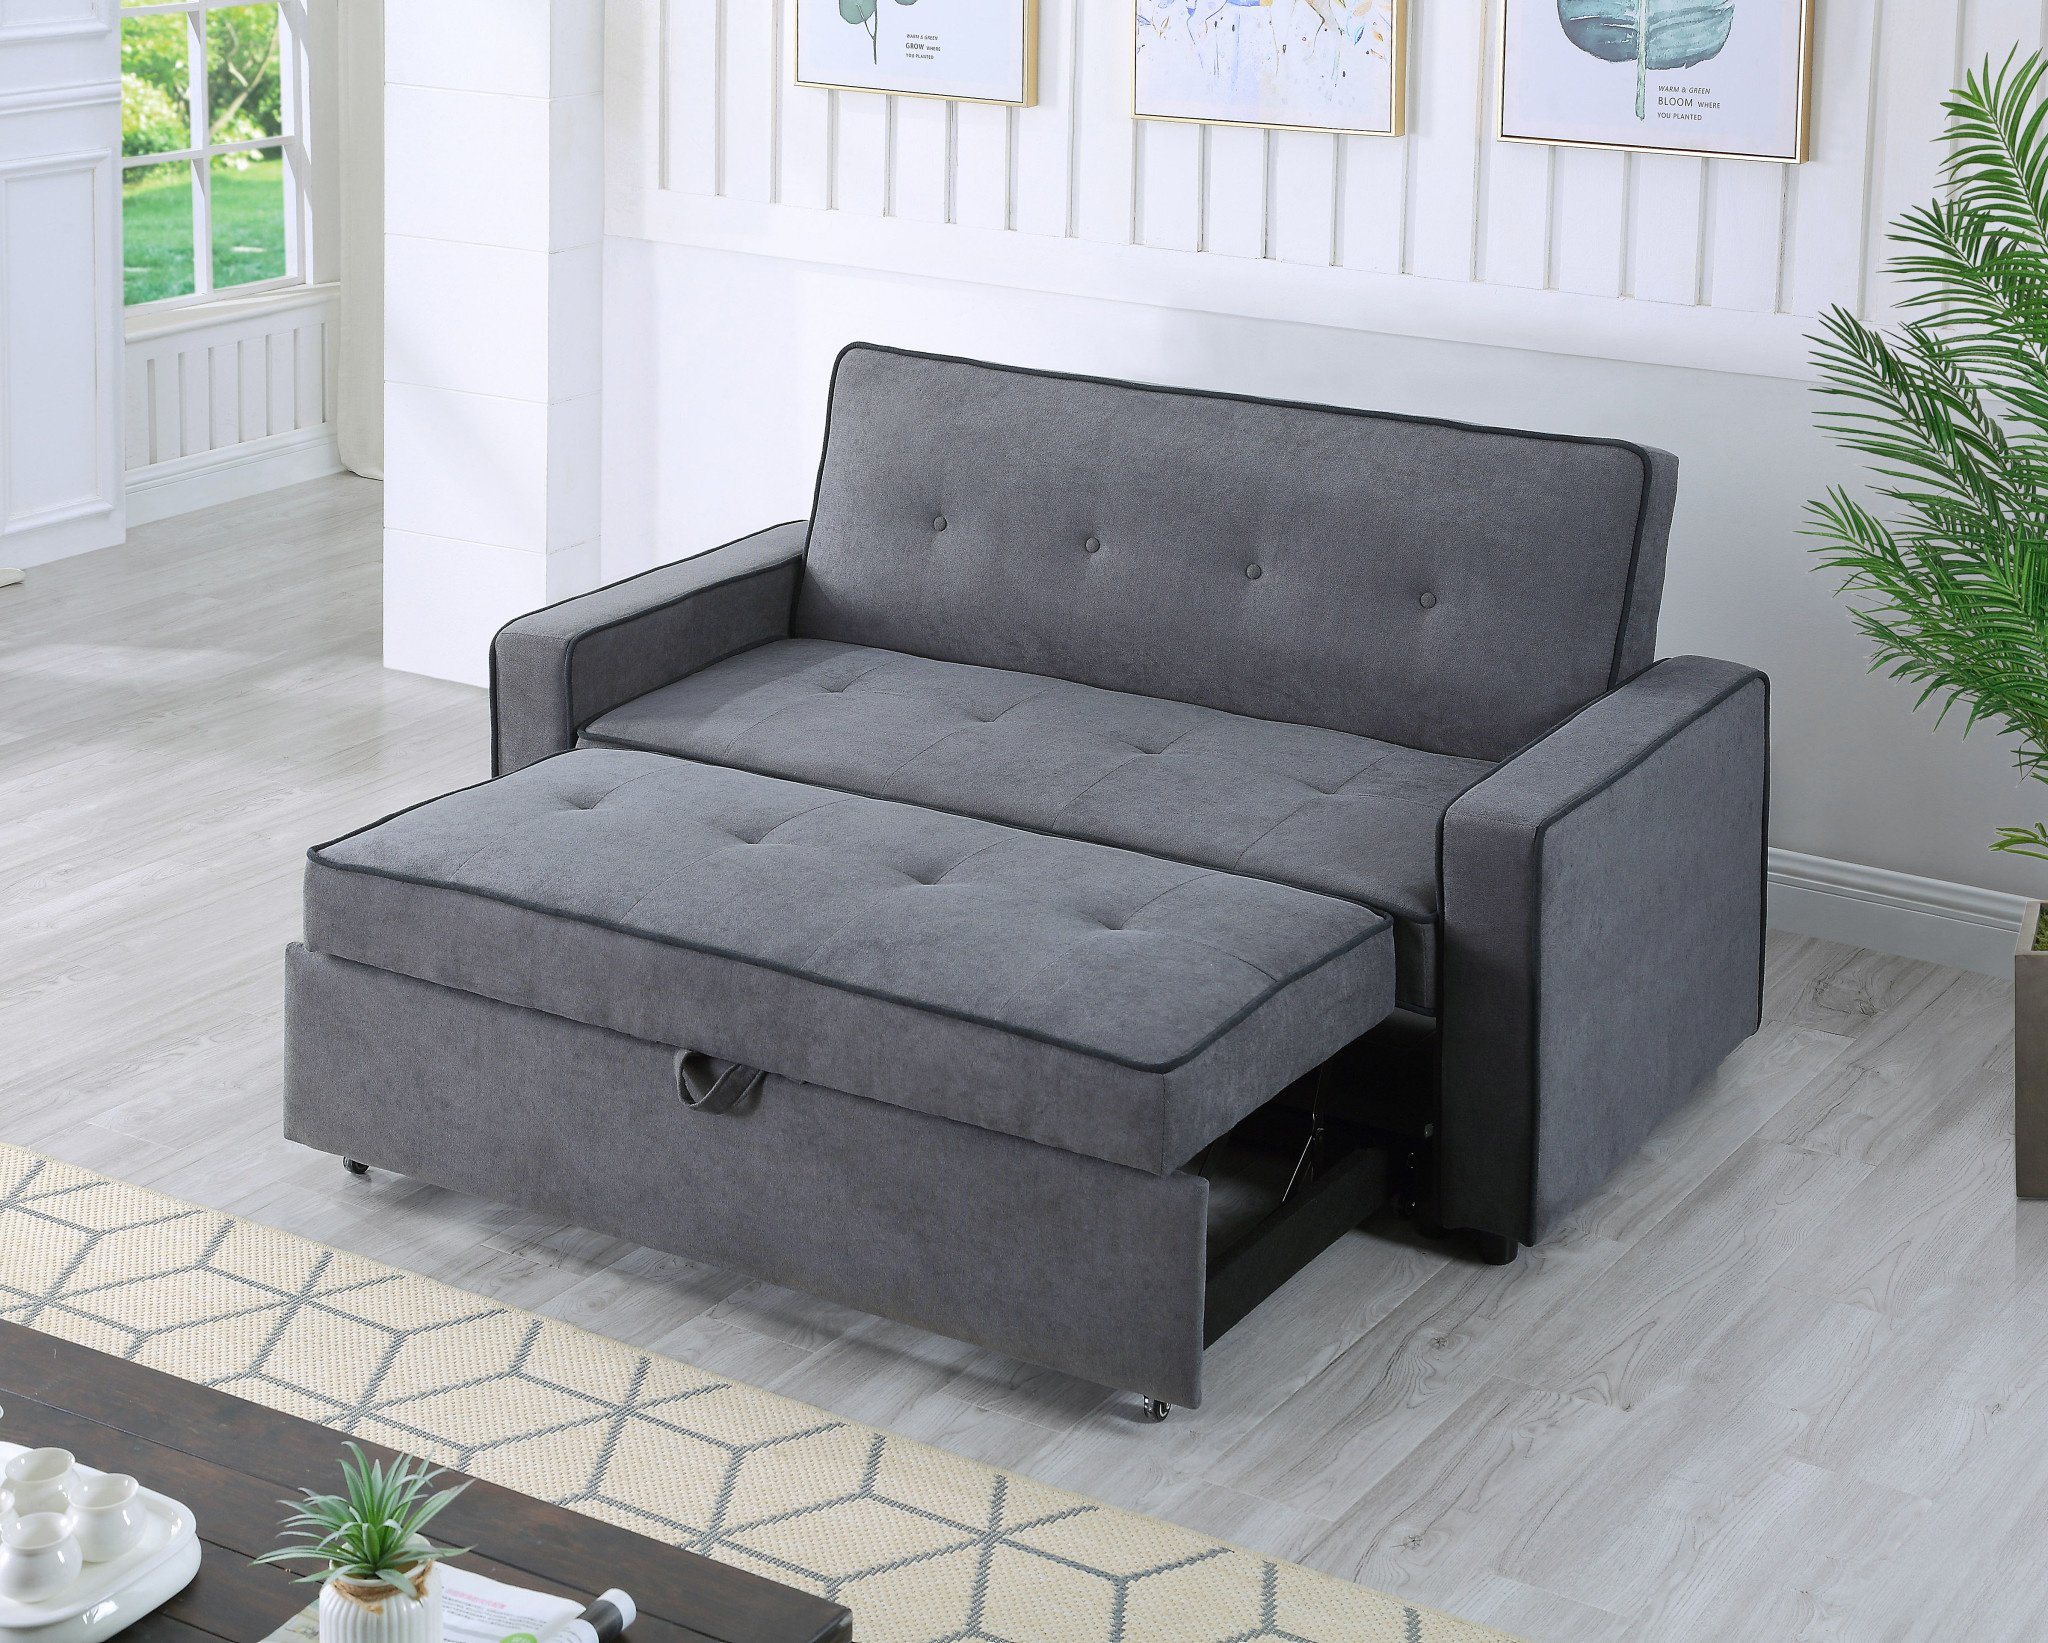 2 seater sofa beds for sale